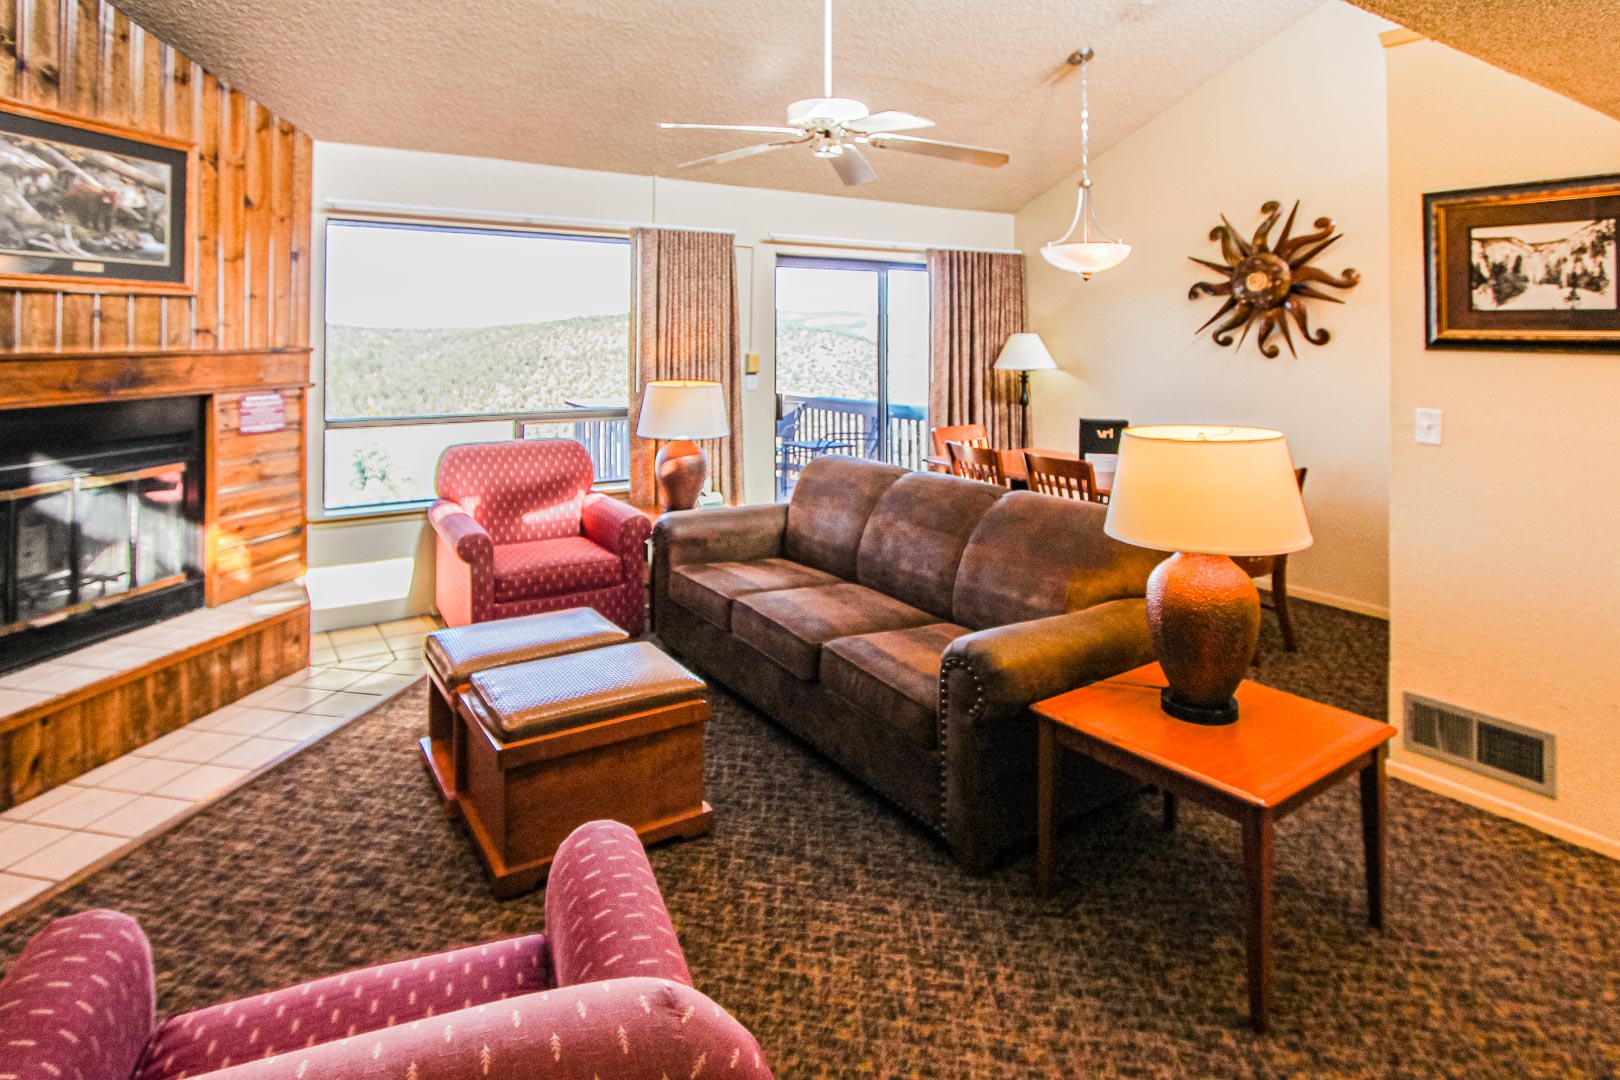 A standard living room area at VRI's Crown Point Condominiums in New Mexico.